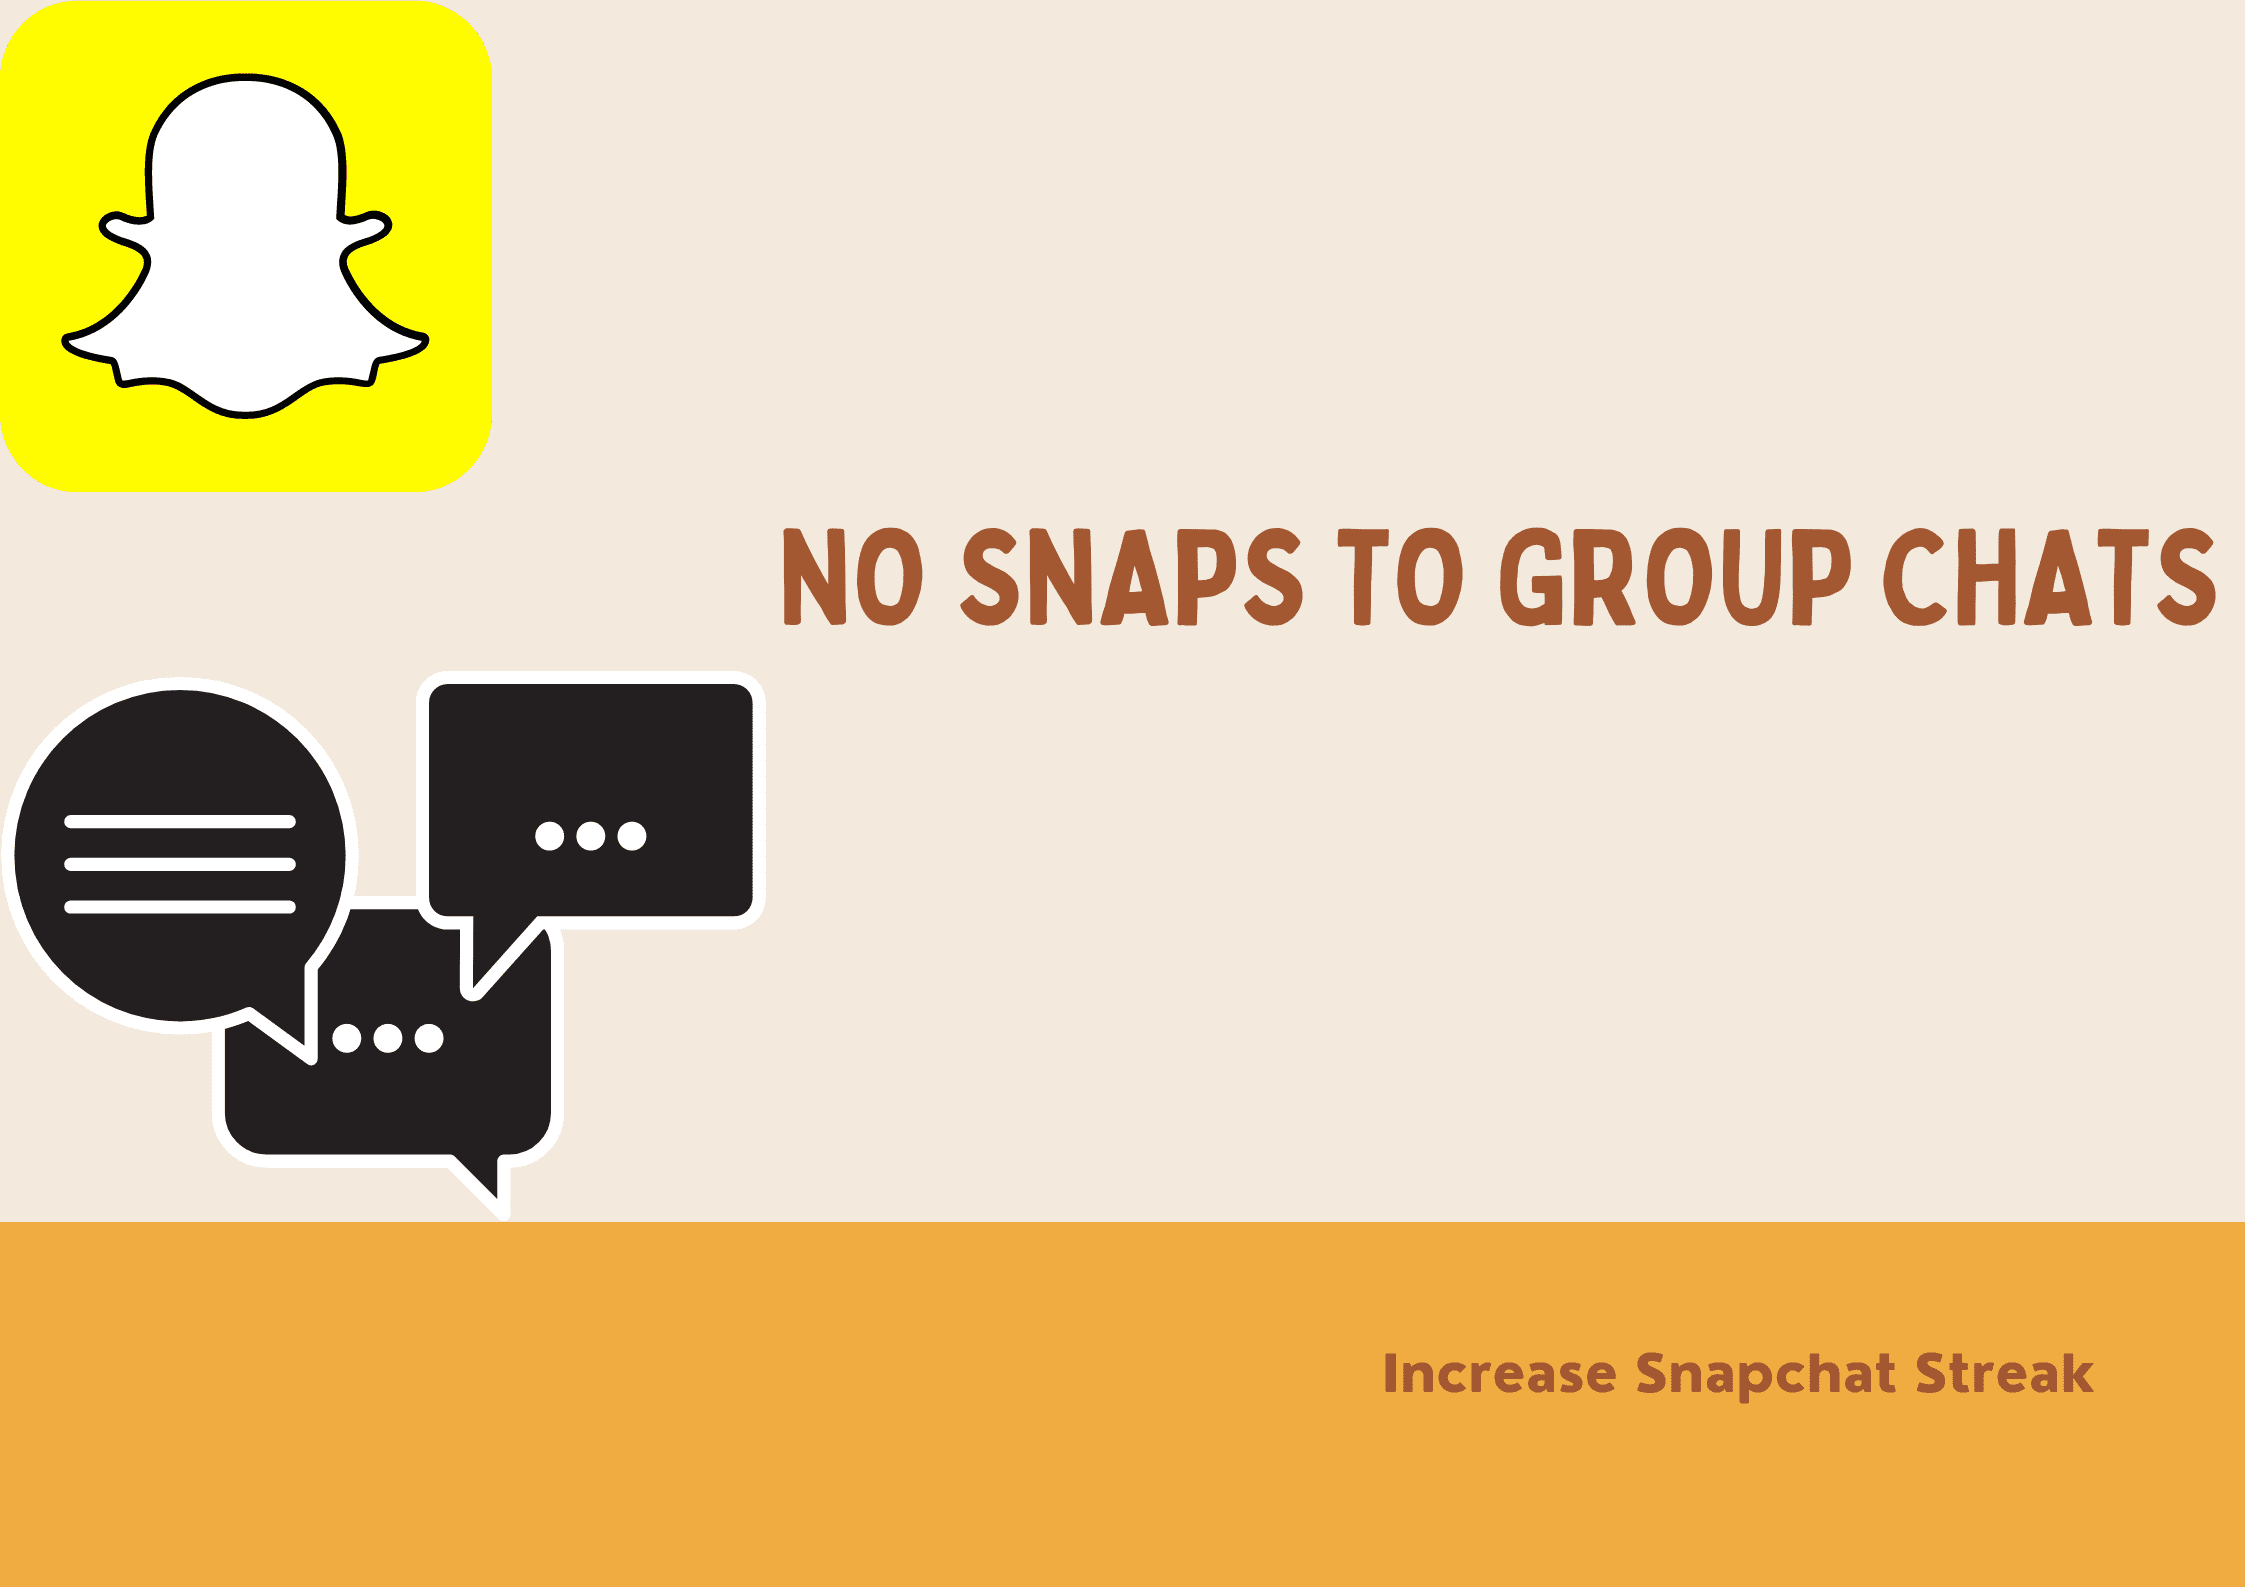  No snaps to group chats